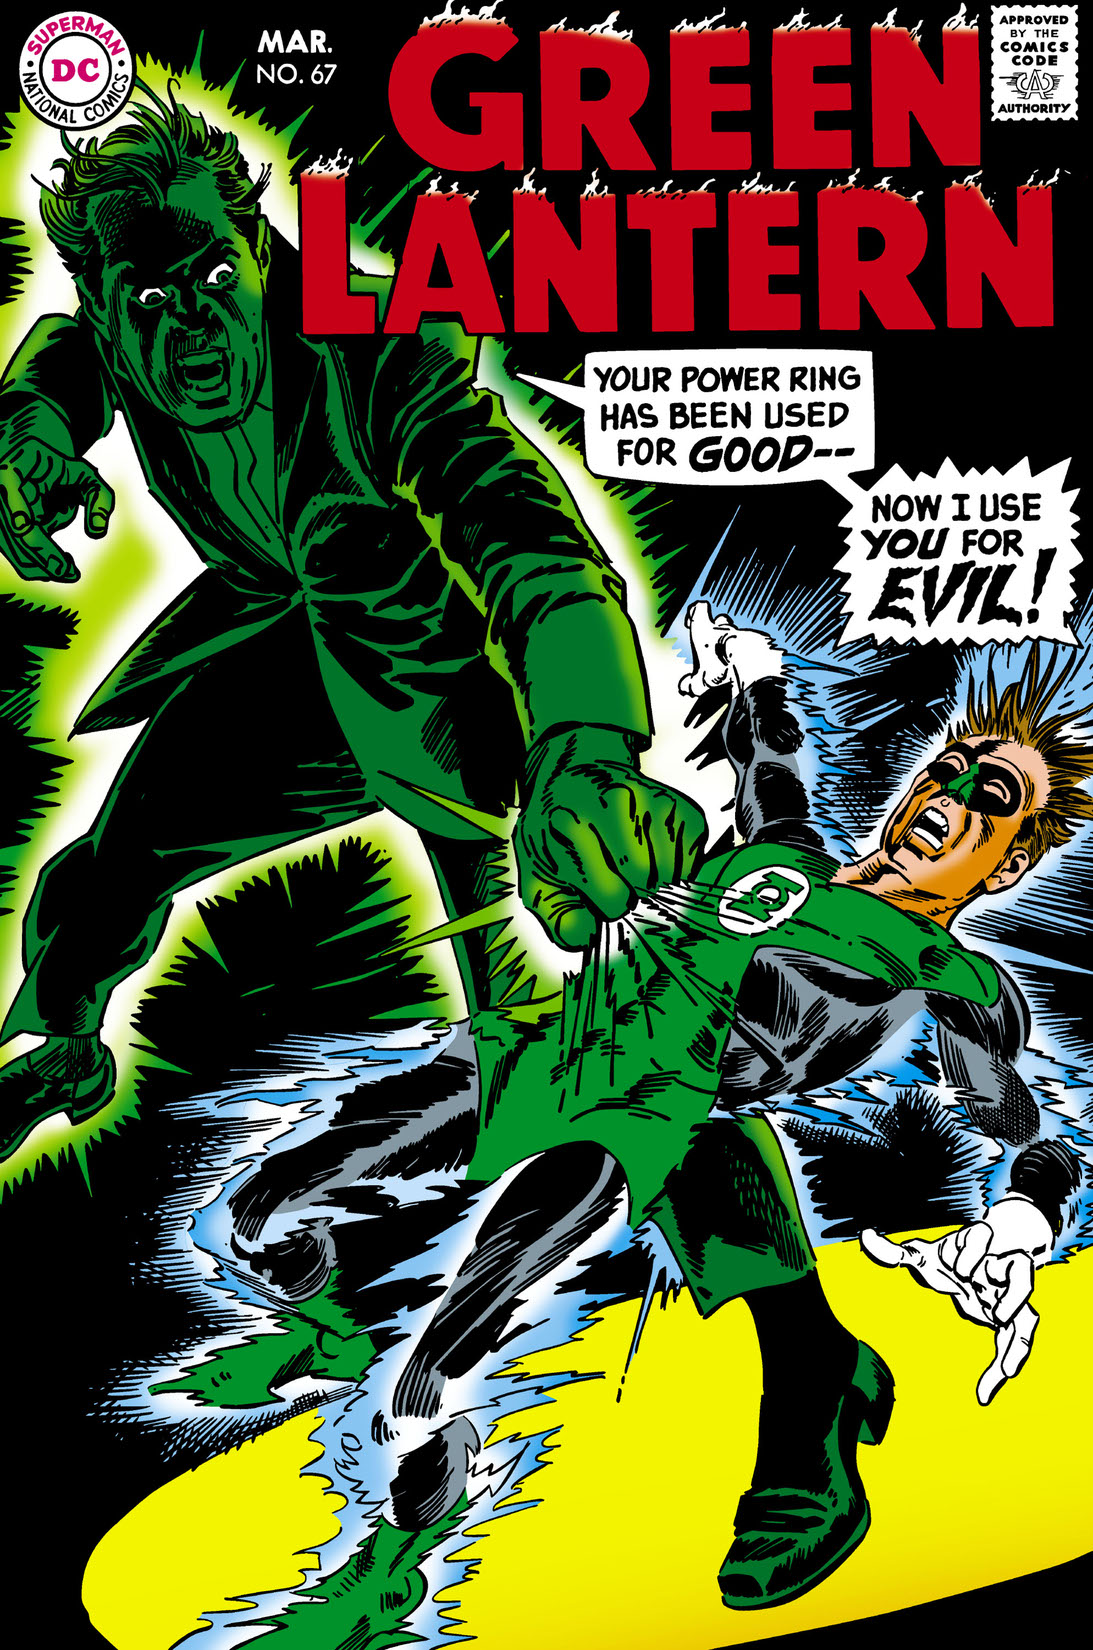 Green Lantern (1960-) #67 preview images